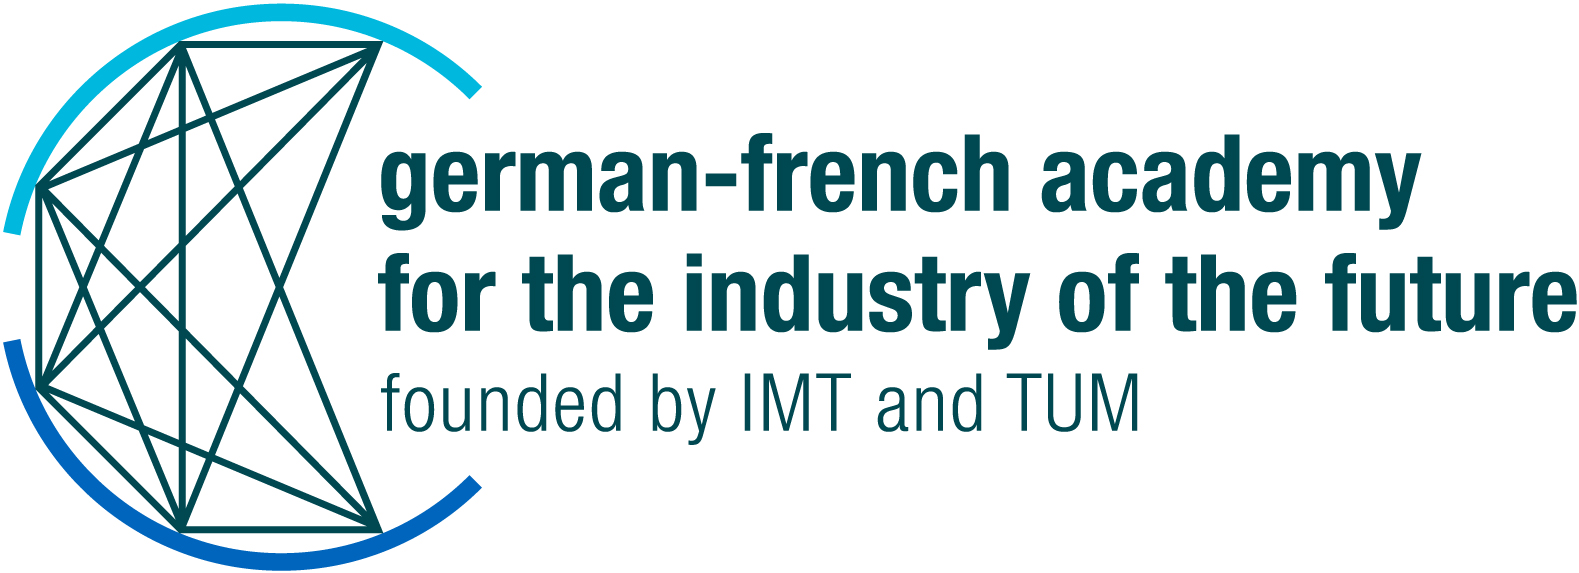 German French Academy for the industry of the future